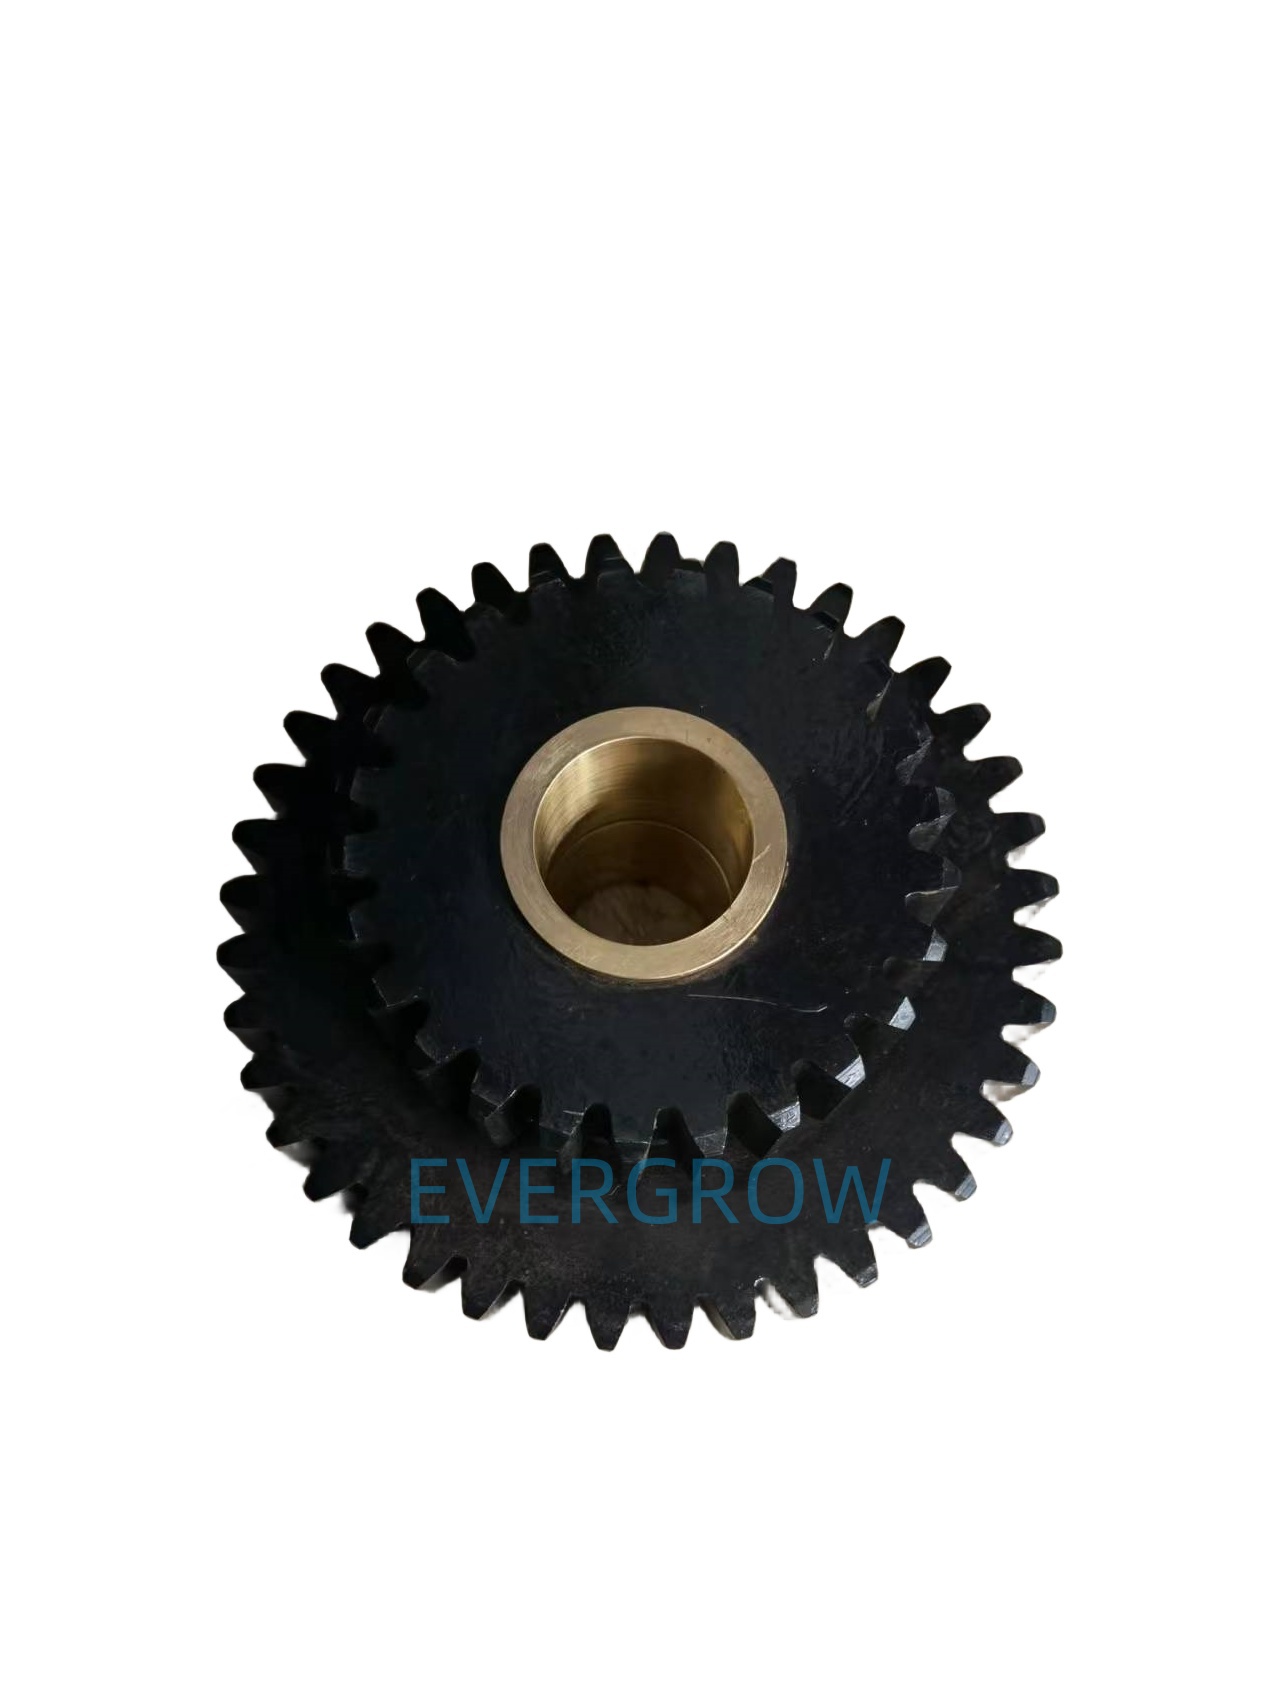 Introduction to GEAR, COMPOUND, 40X25 OEM 30156250